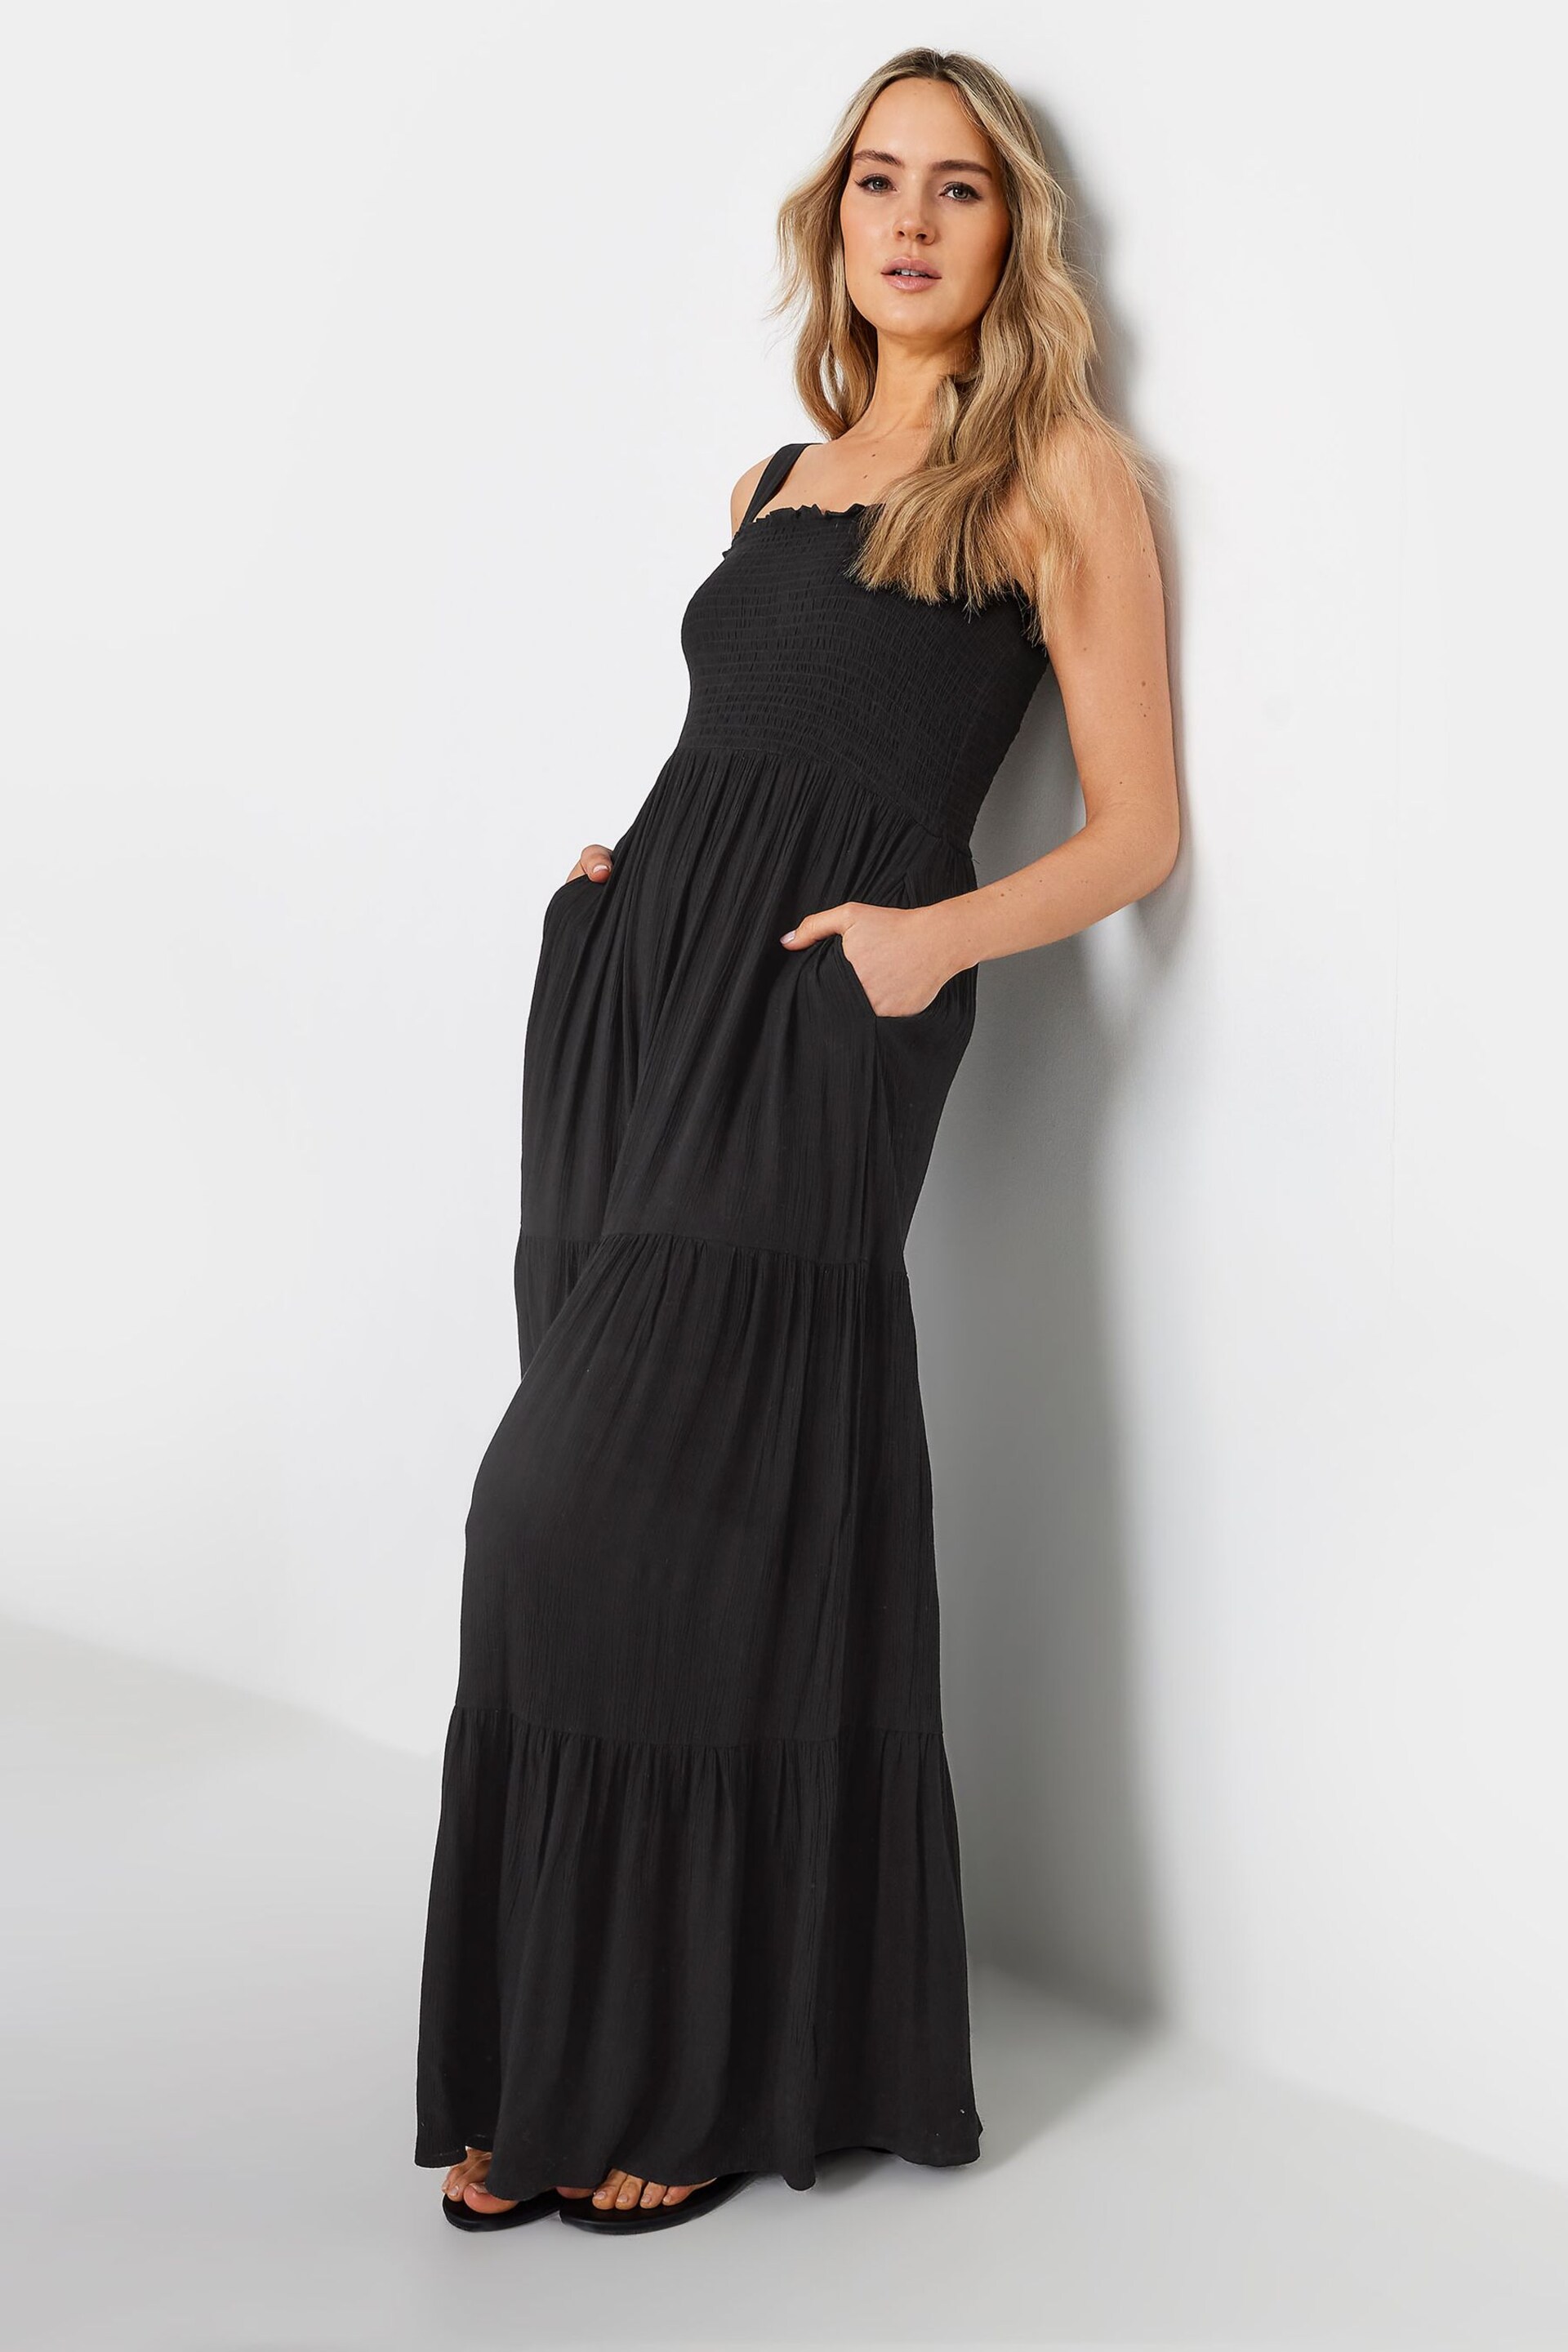 Long Tall Sally Black Crinkle Tiered Dress - Image 1 of 5